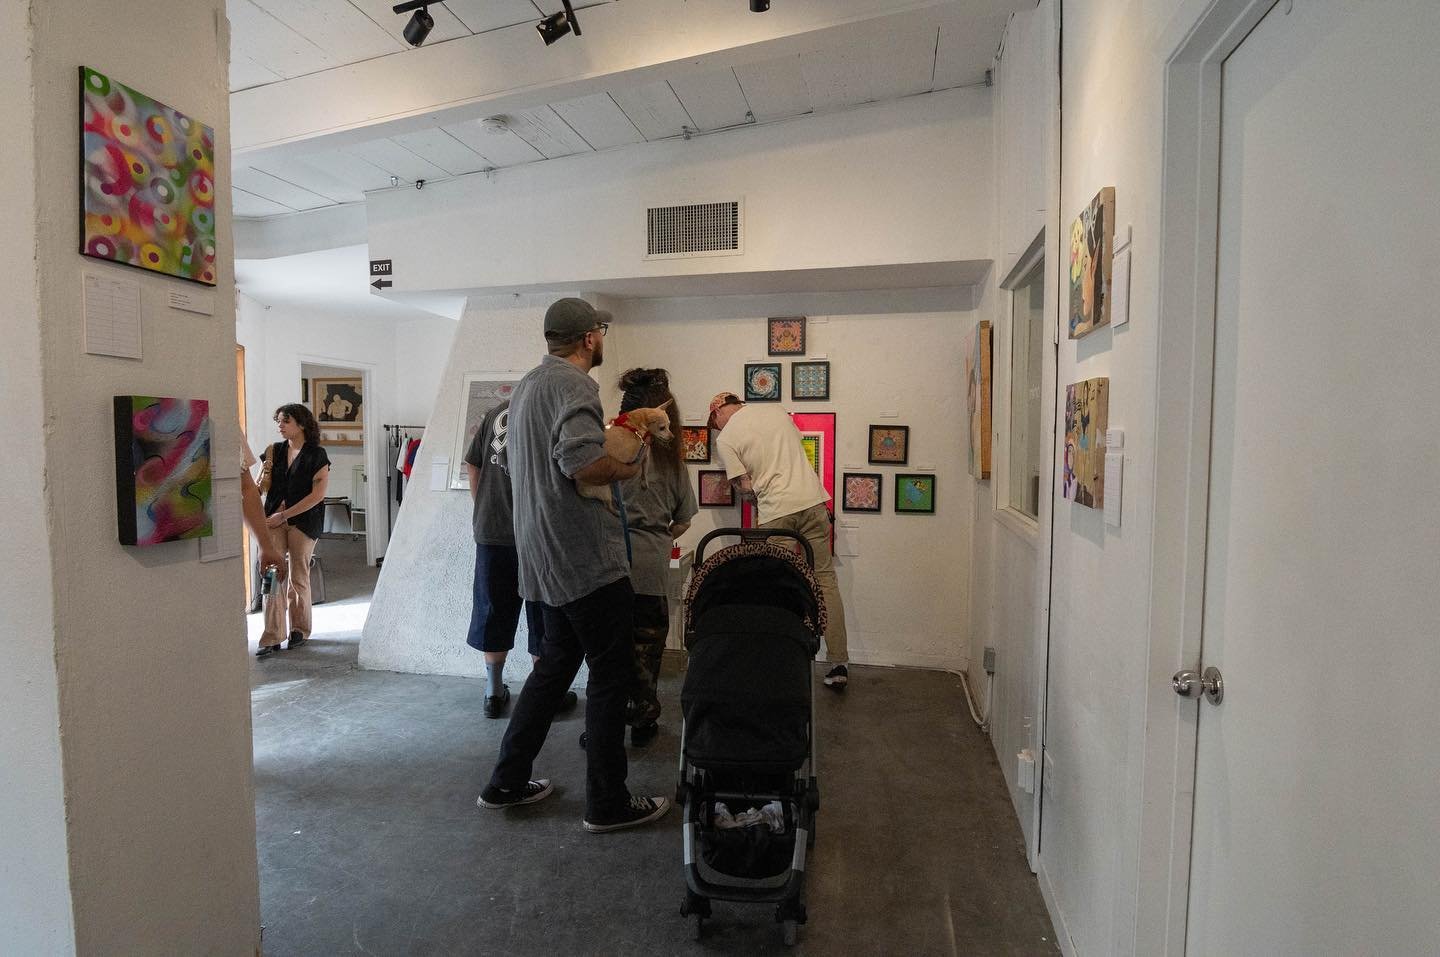 Thank you to all who came out to support @super.ultra.nova&rsquo;s 1 year anniversary fundraiser show! A very special thanks to all of the artists who donated their art pieces, to the resident artists who helped organize and prepare, and to all of th